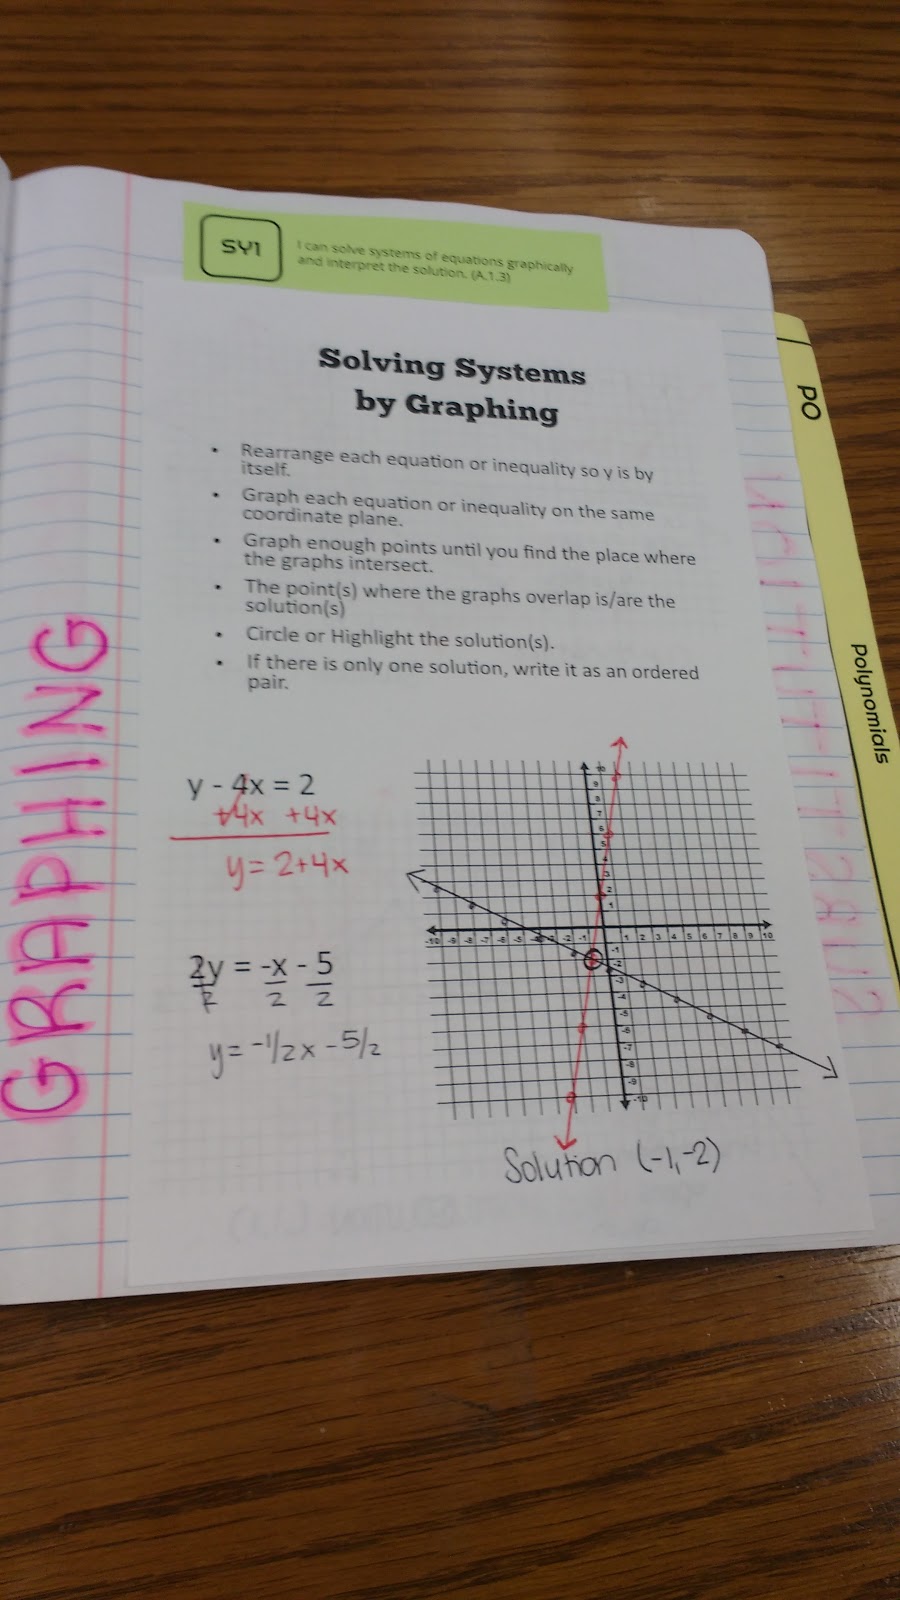 Solving Systems by Graphing Foldable